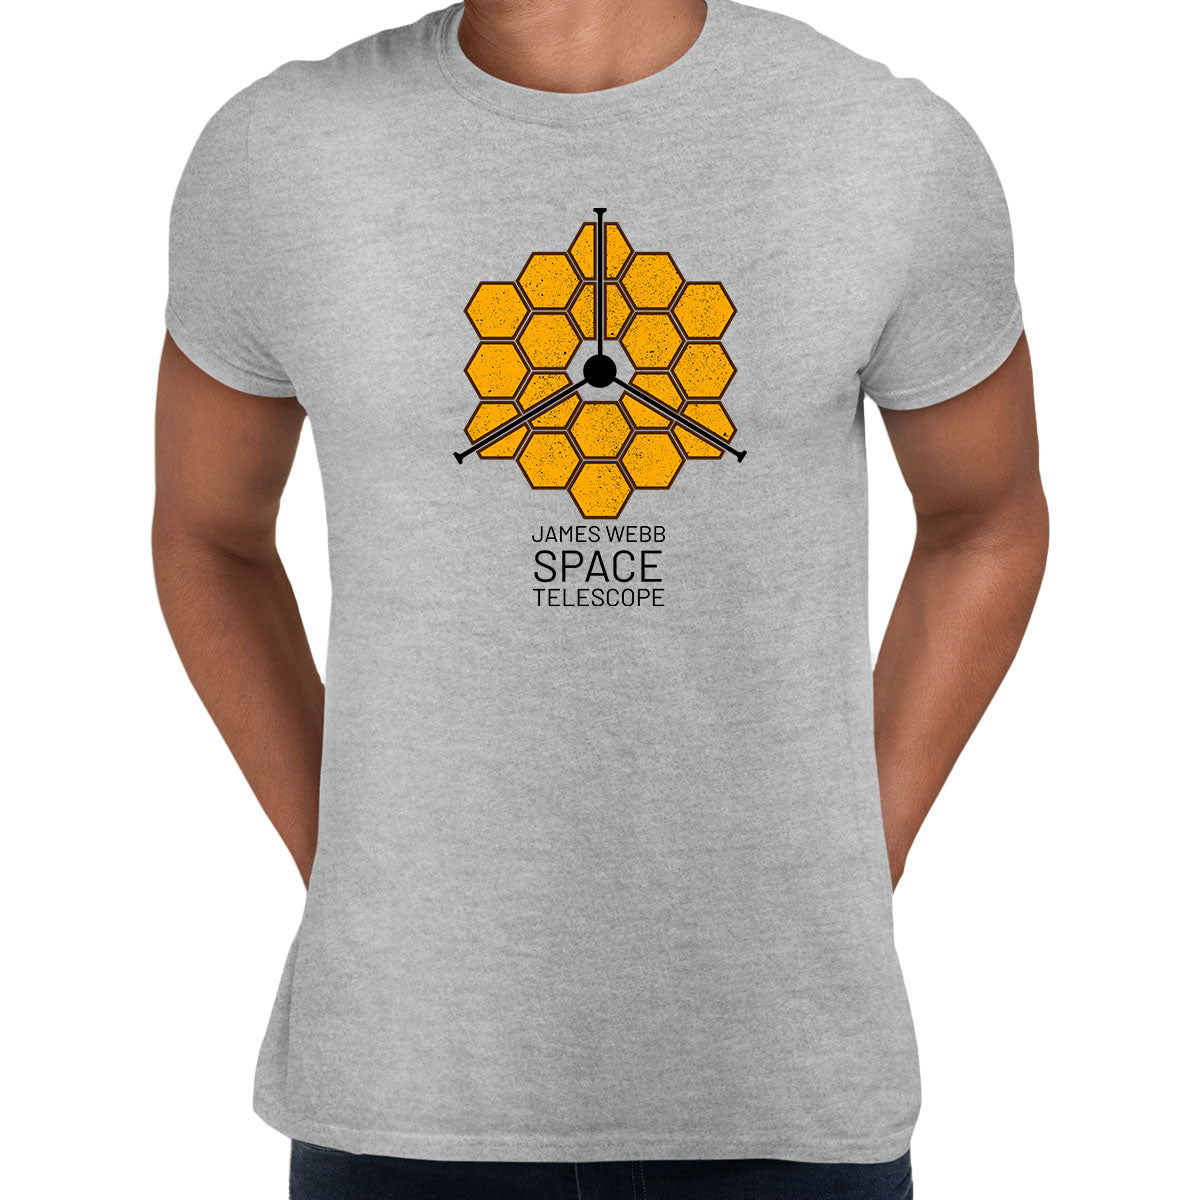 James Webb Space Telescope T-shirt Short Sleeve - I'm Going To Outer Space Unisex T-shirt - Kuzi Tees